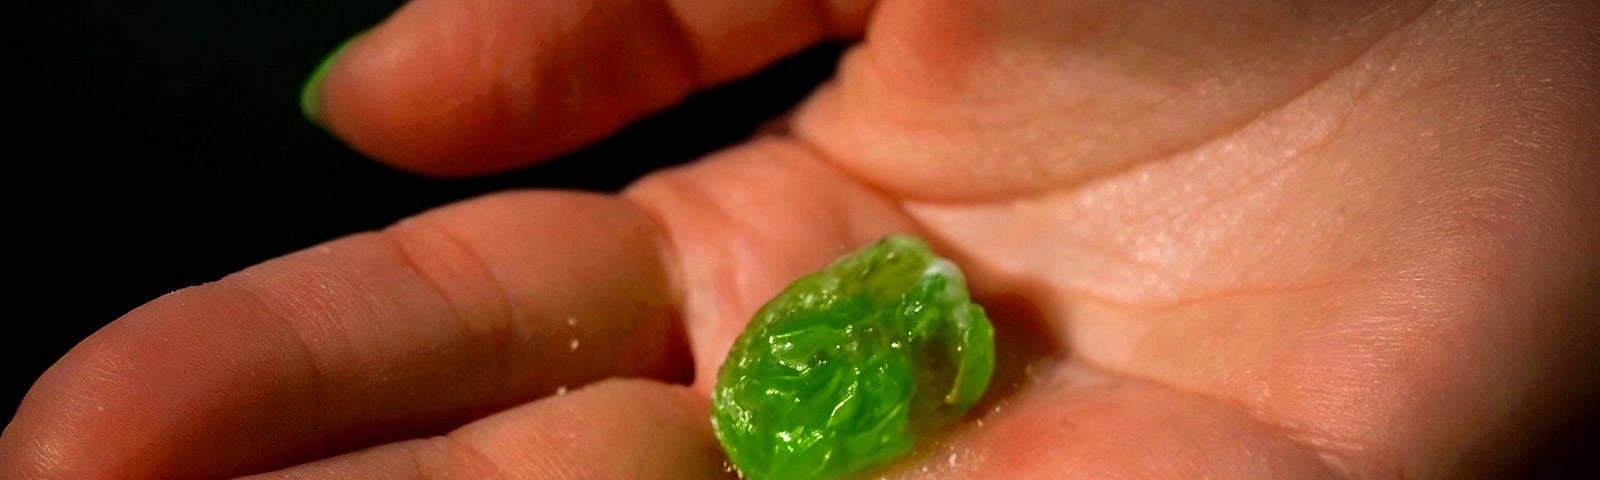 Close-up of a hand holding a lime green, misshapen gummy candy.